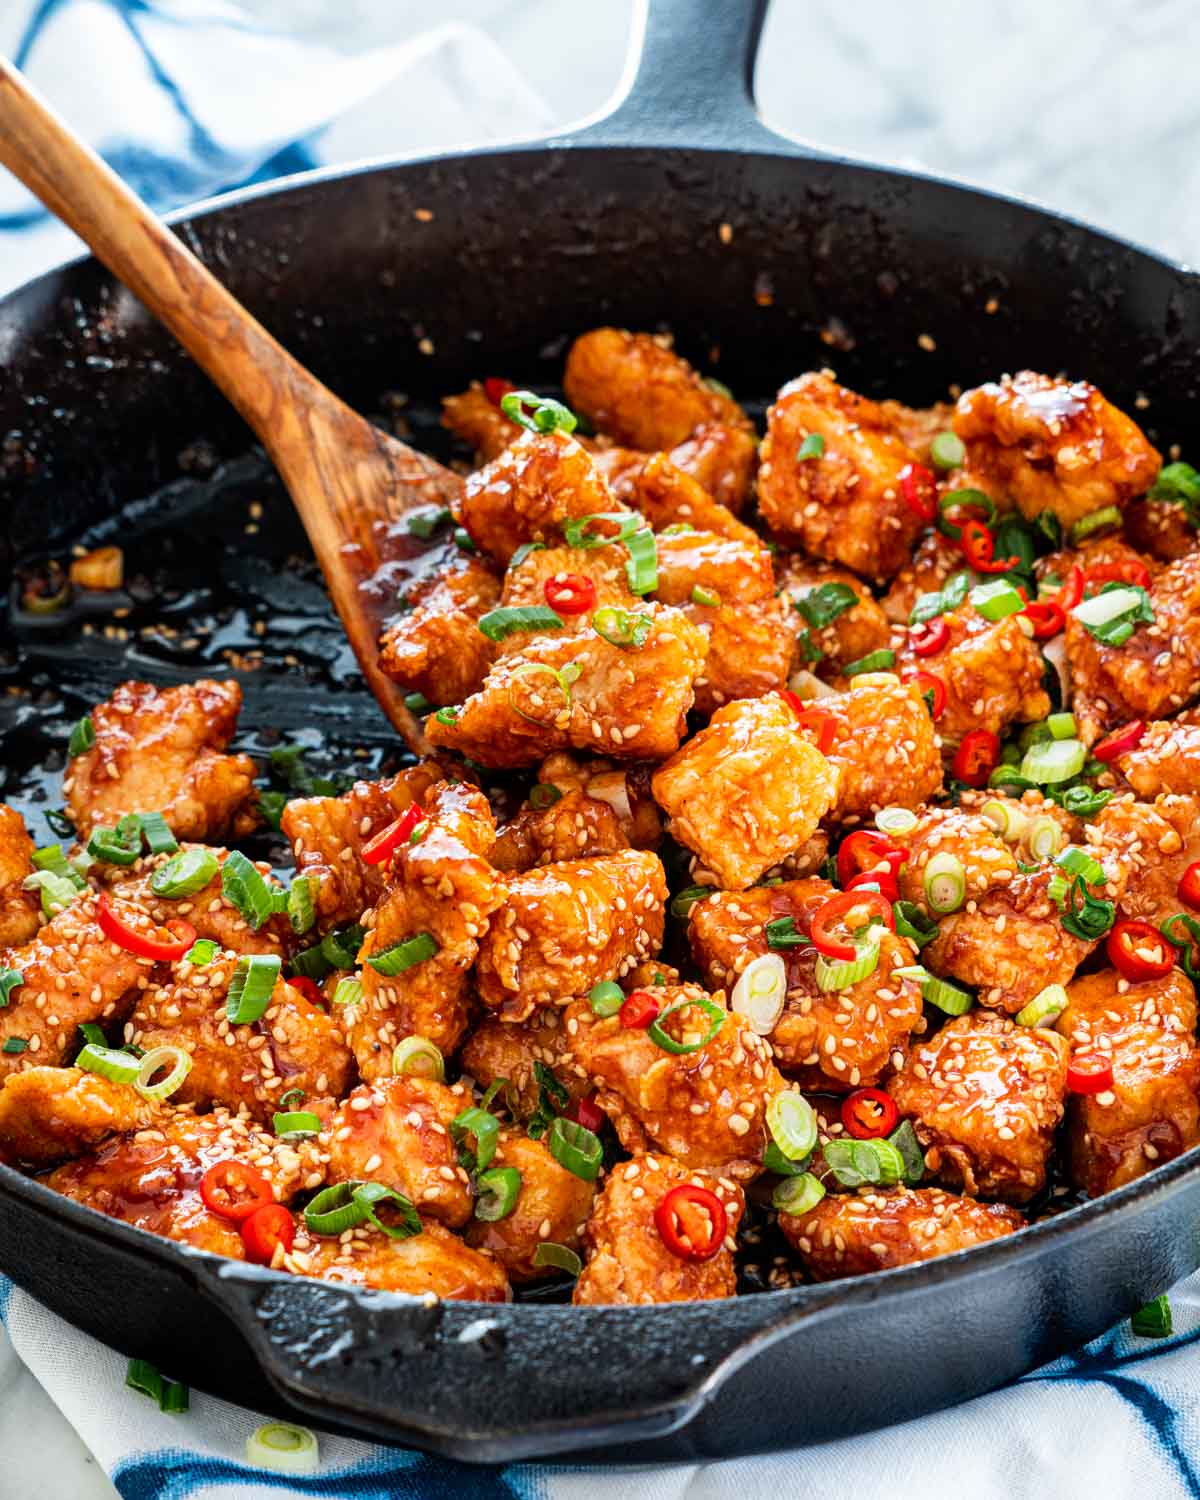 korean fried chicken in a skillet garnished with red chilis and green onions